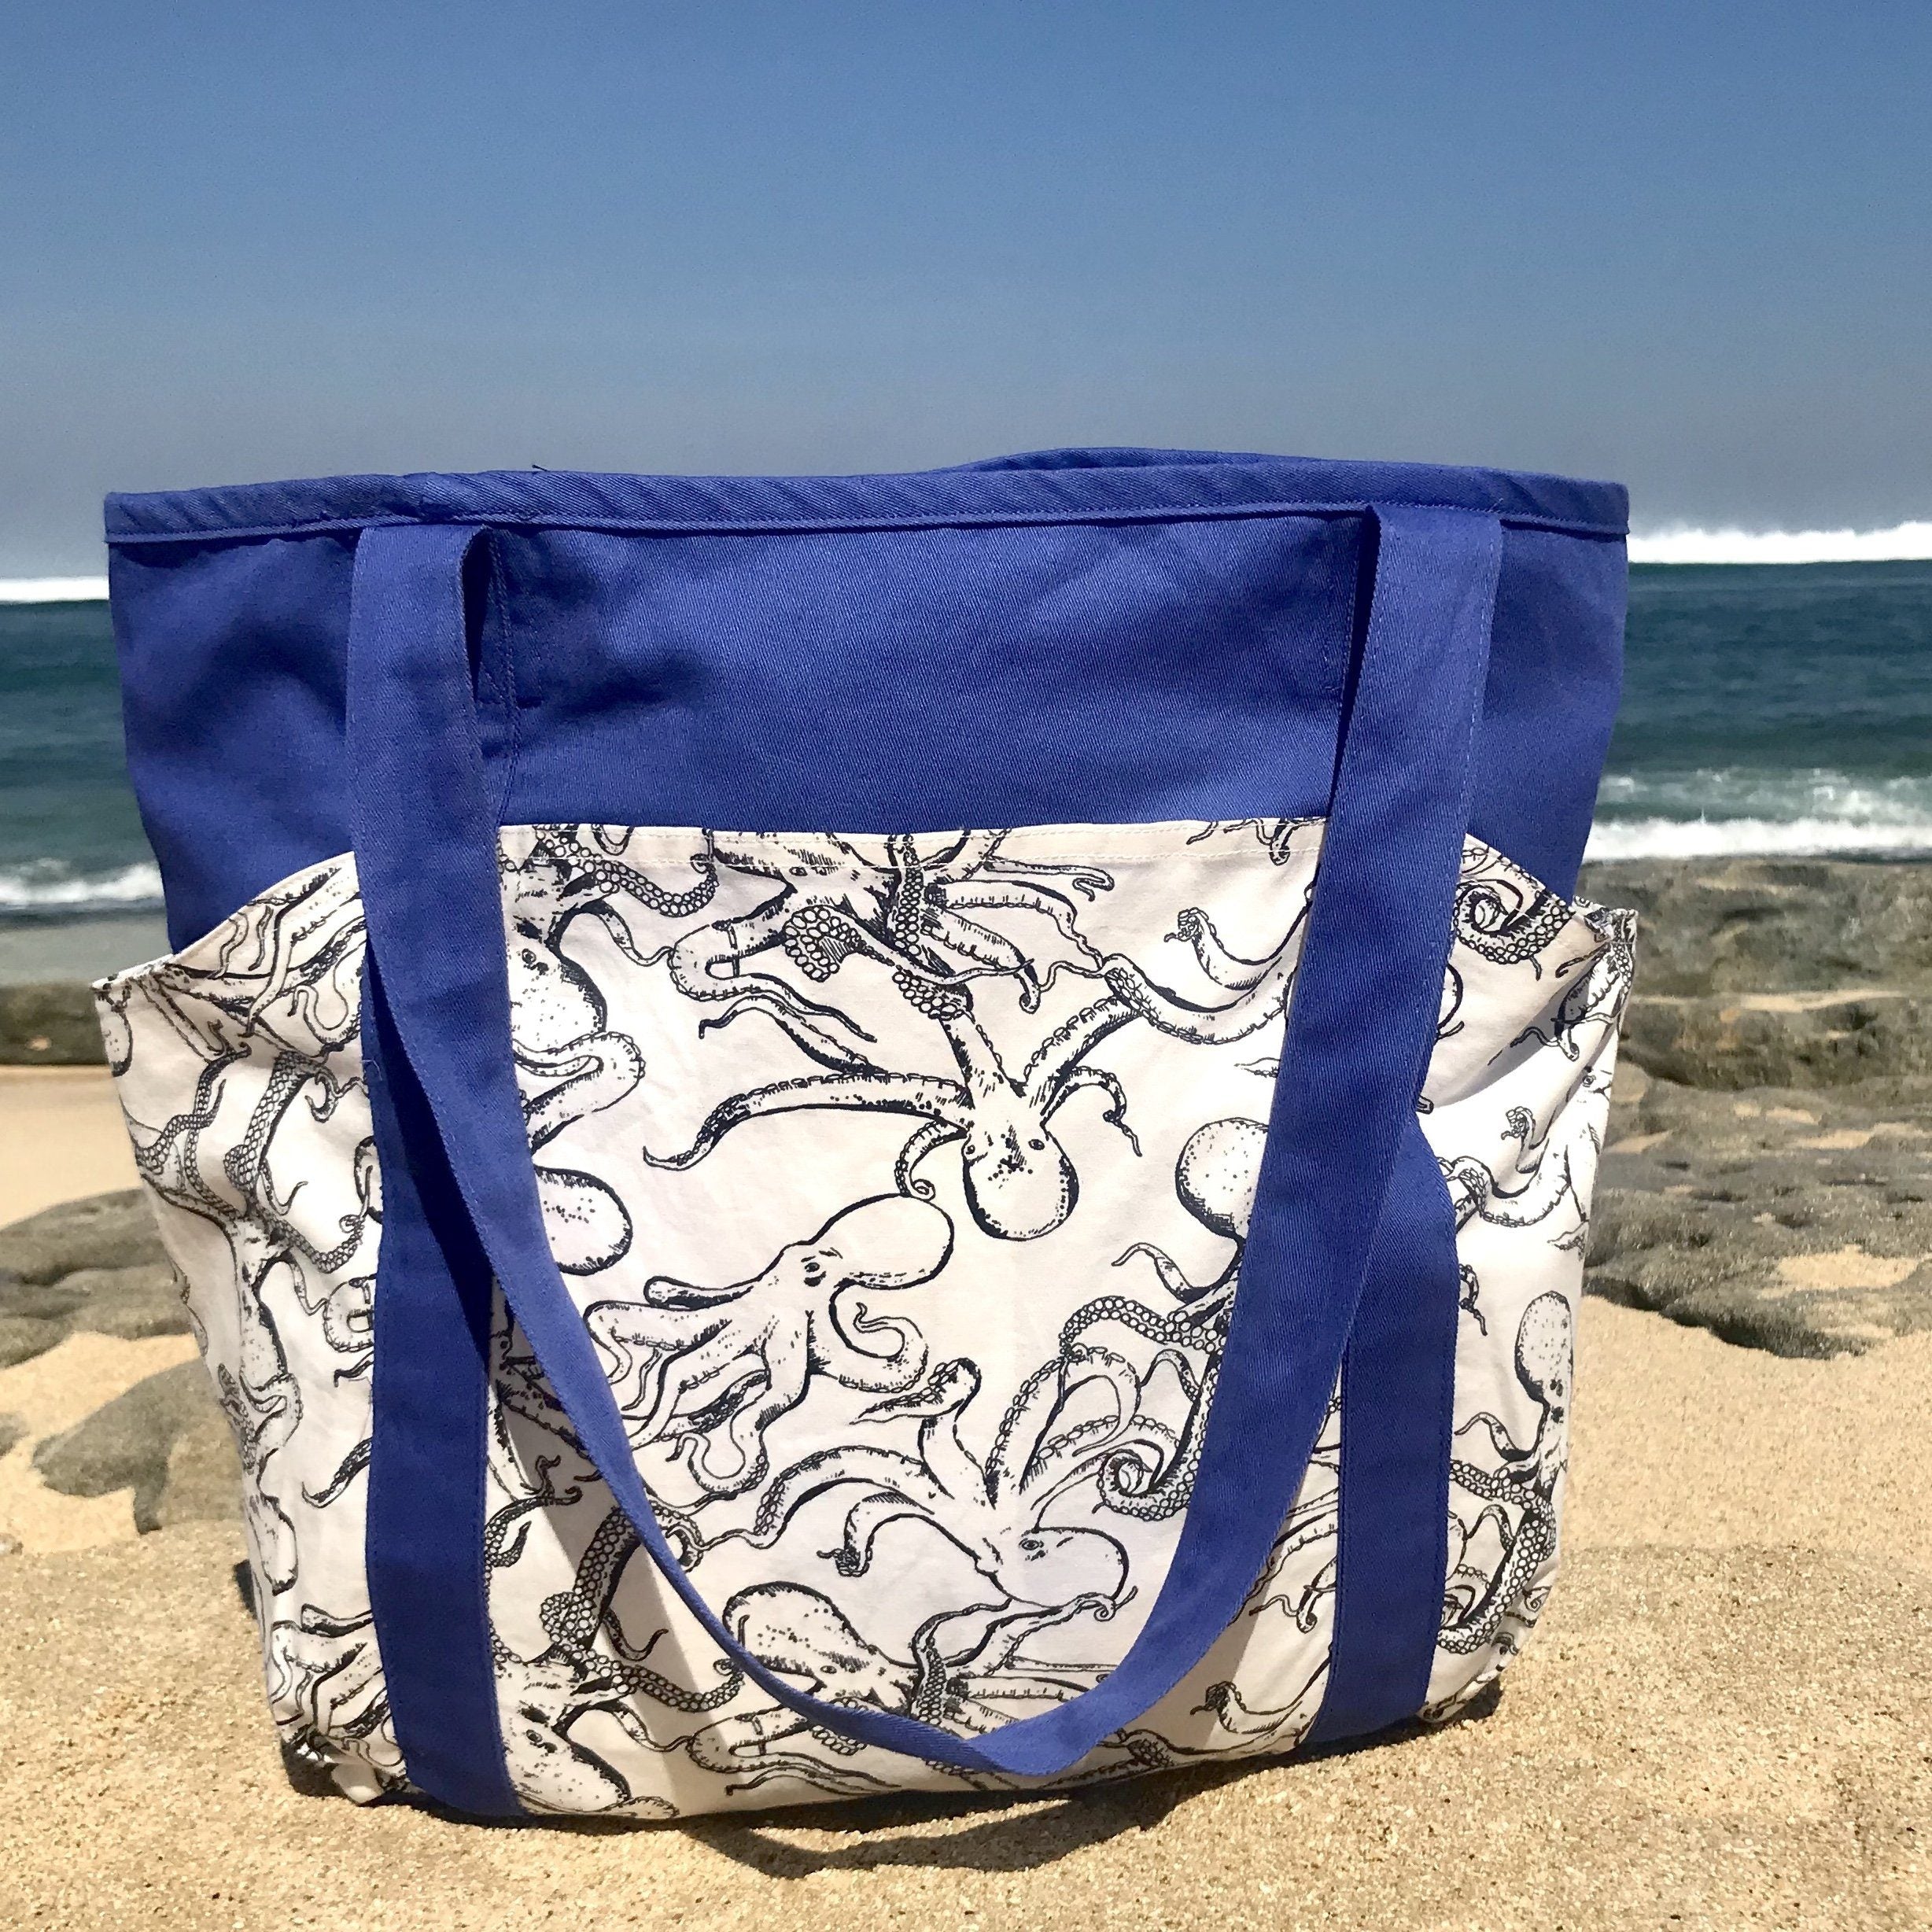 These octopi might not crack you up but they will probably make you smile if you love sea creatures or being by the sea. The ocean inspired print features an octopus all over print and is perfect for weekend trips to the beach!